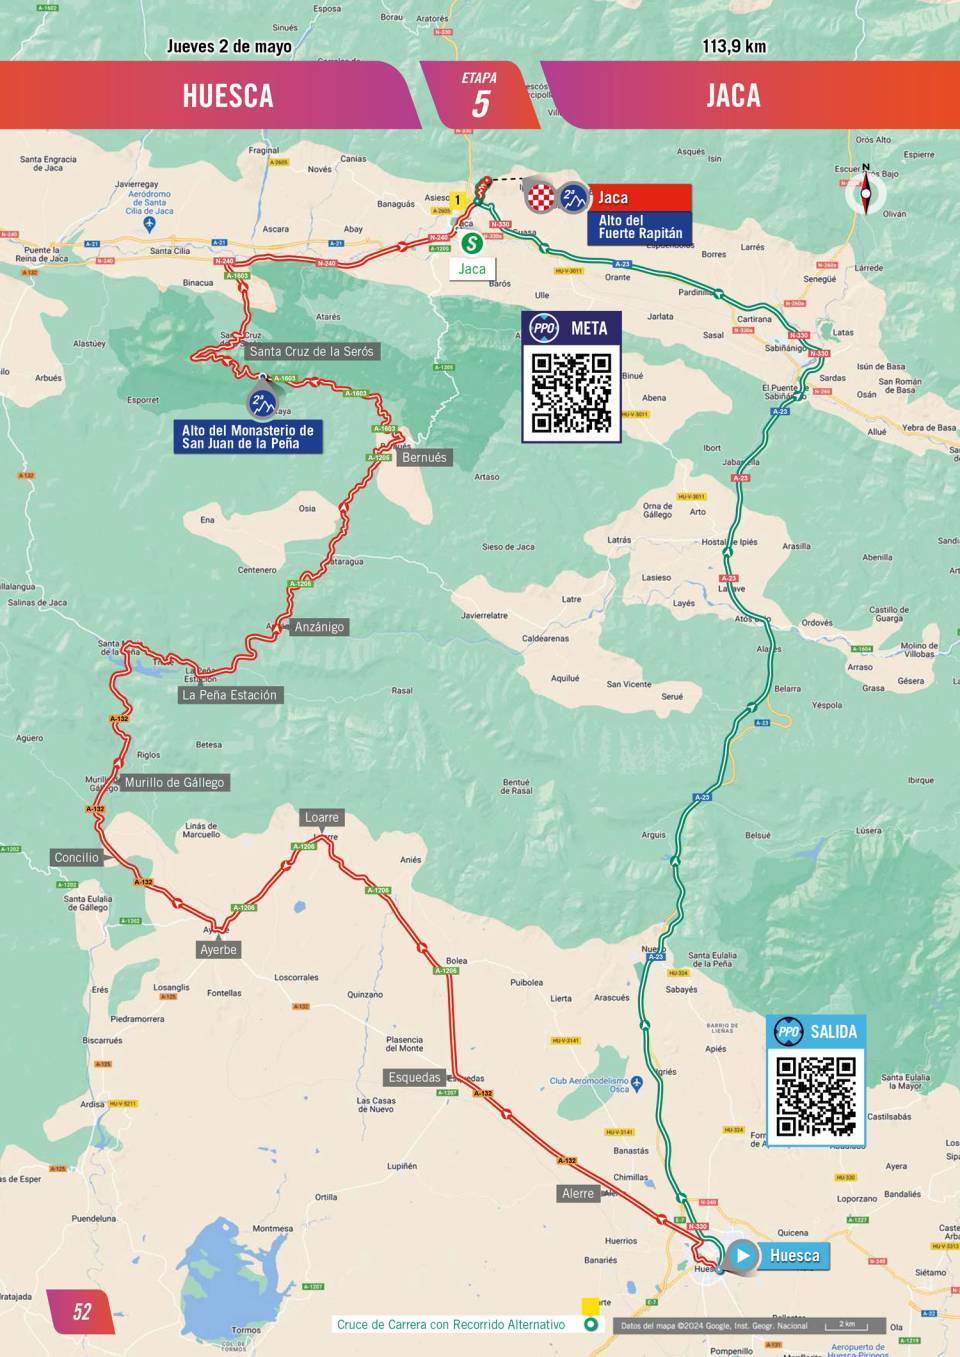 The route for stage 5 of the Vuelta Femenina, showing a winding route north from Huesca that zags west, tacks back east, and west again on the penultimate climb before the mountaintop finish at Jaca.